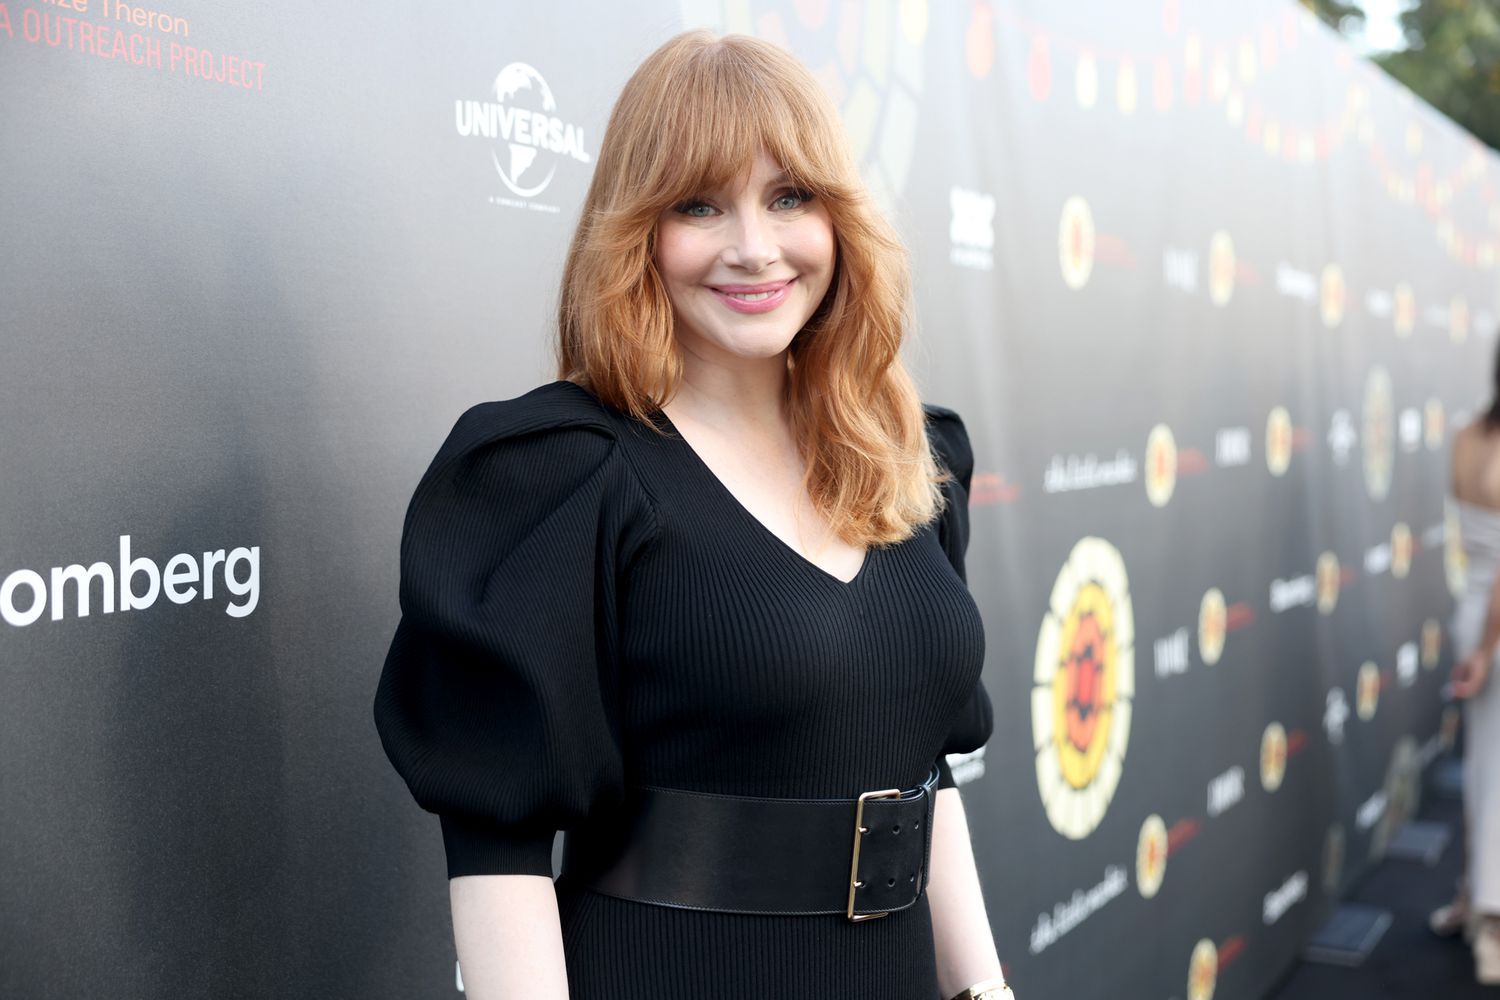 Bryce Dallas Howard wearing a black gown at an event with a smile on her face